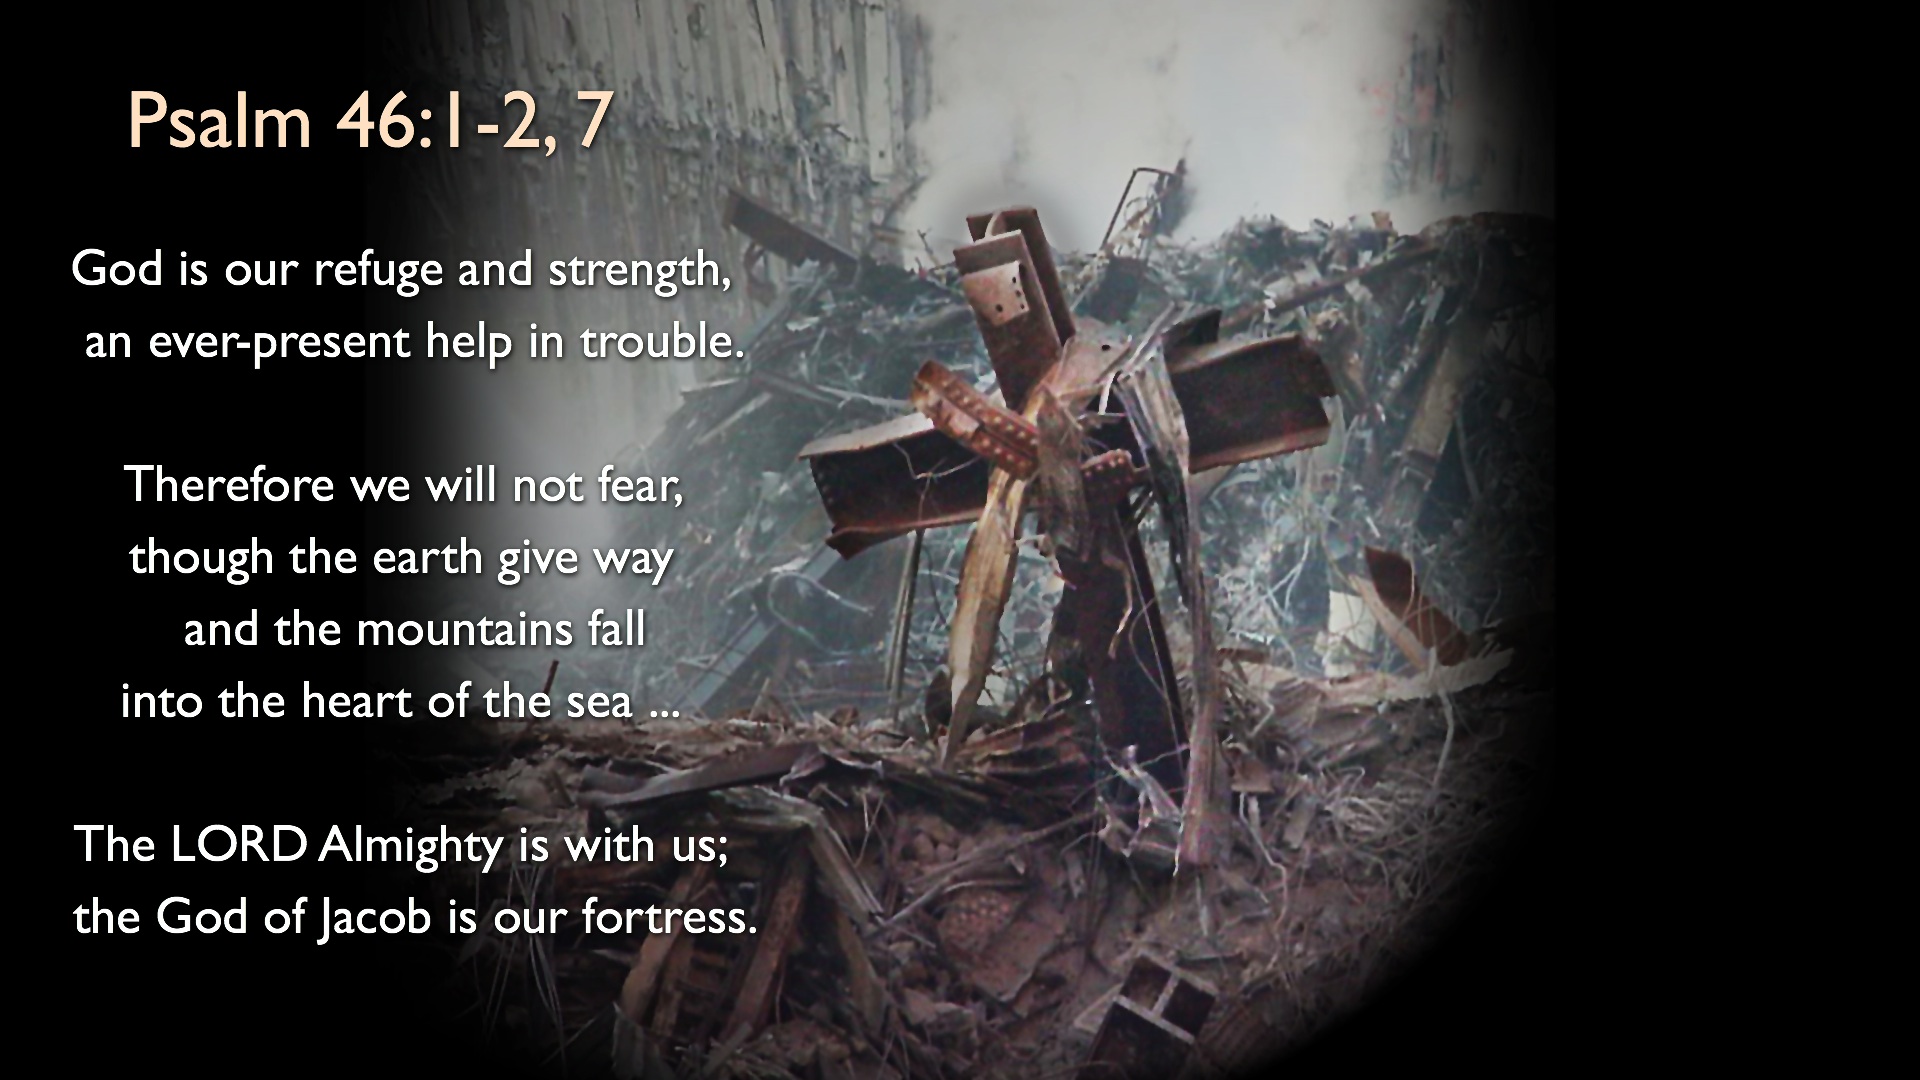 Anthem For Troubled Times Powerpoint Background Of Psalm